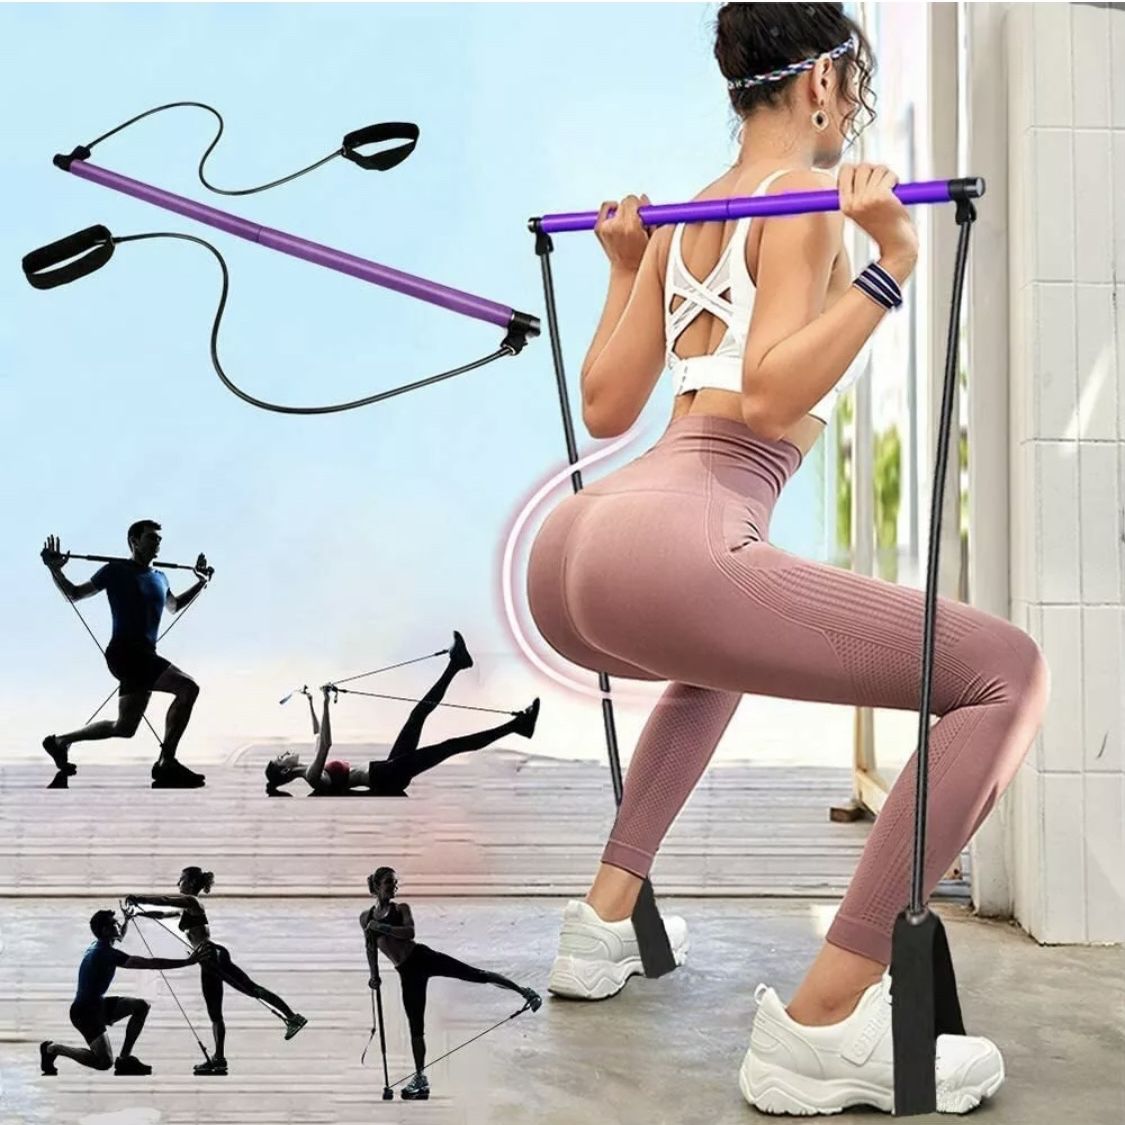 Everyday Essentials Home Gym Exercise Equipment Strength stick Workout Station